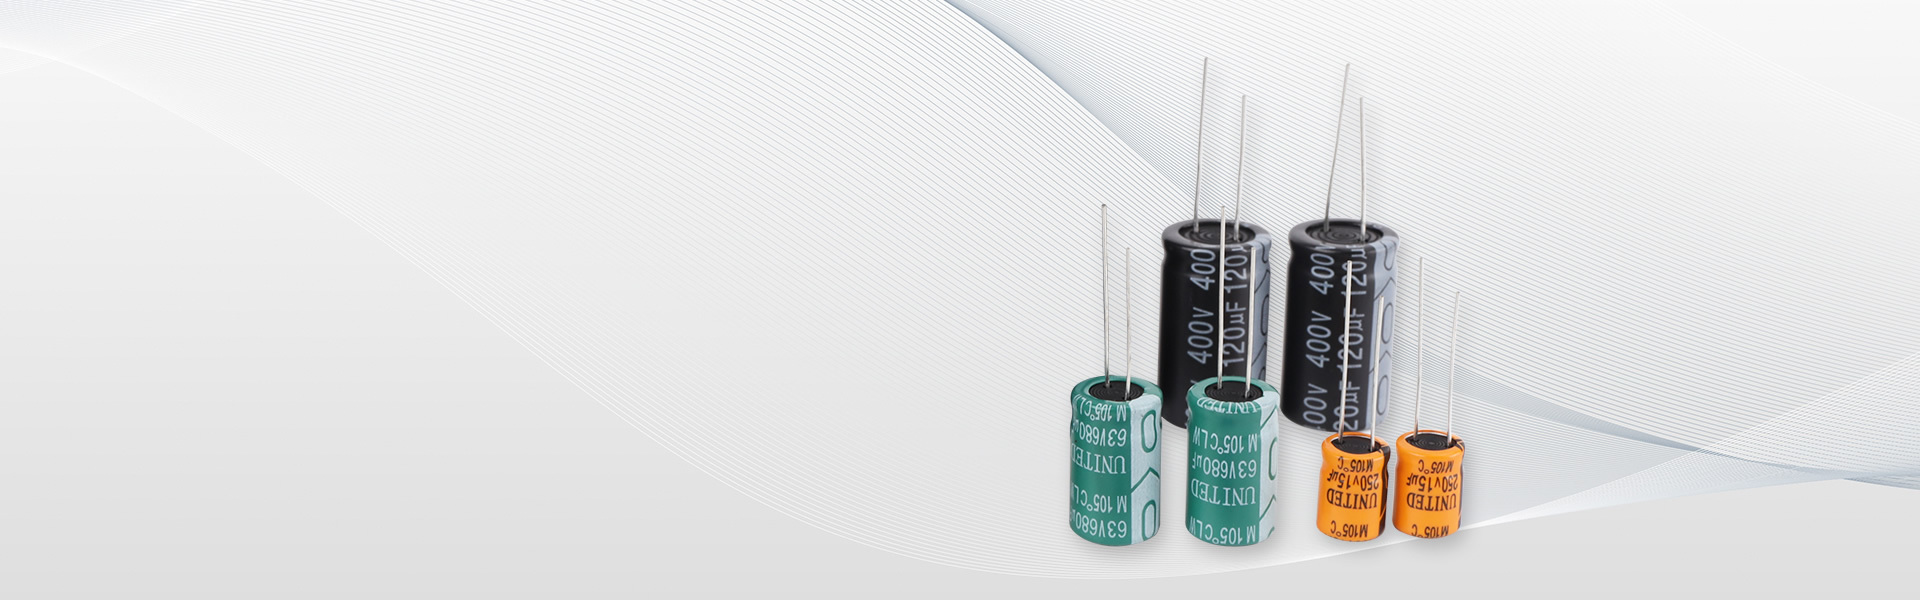 Application of Radial Type Capacitor